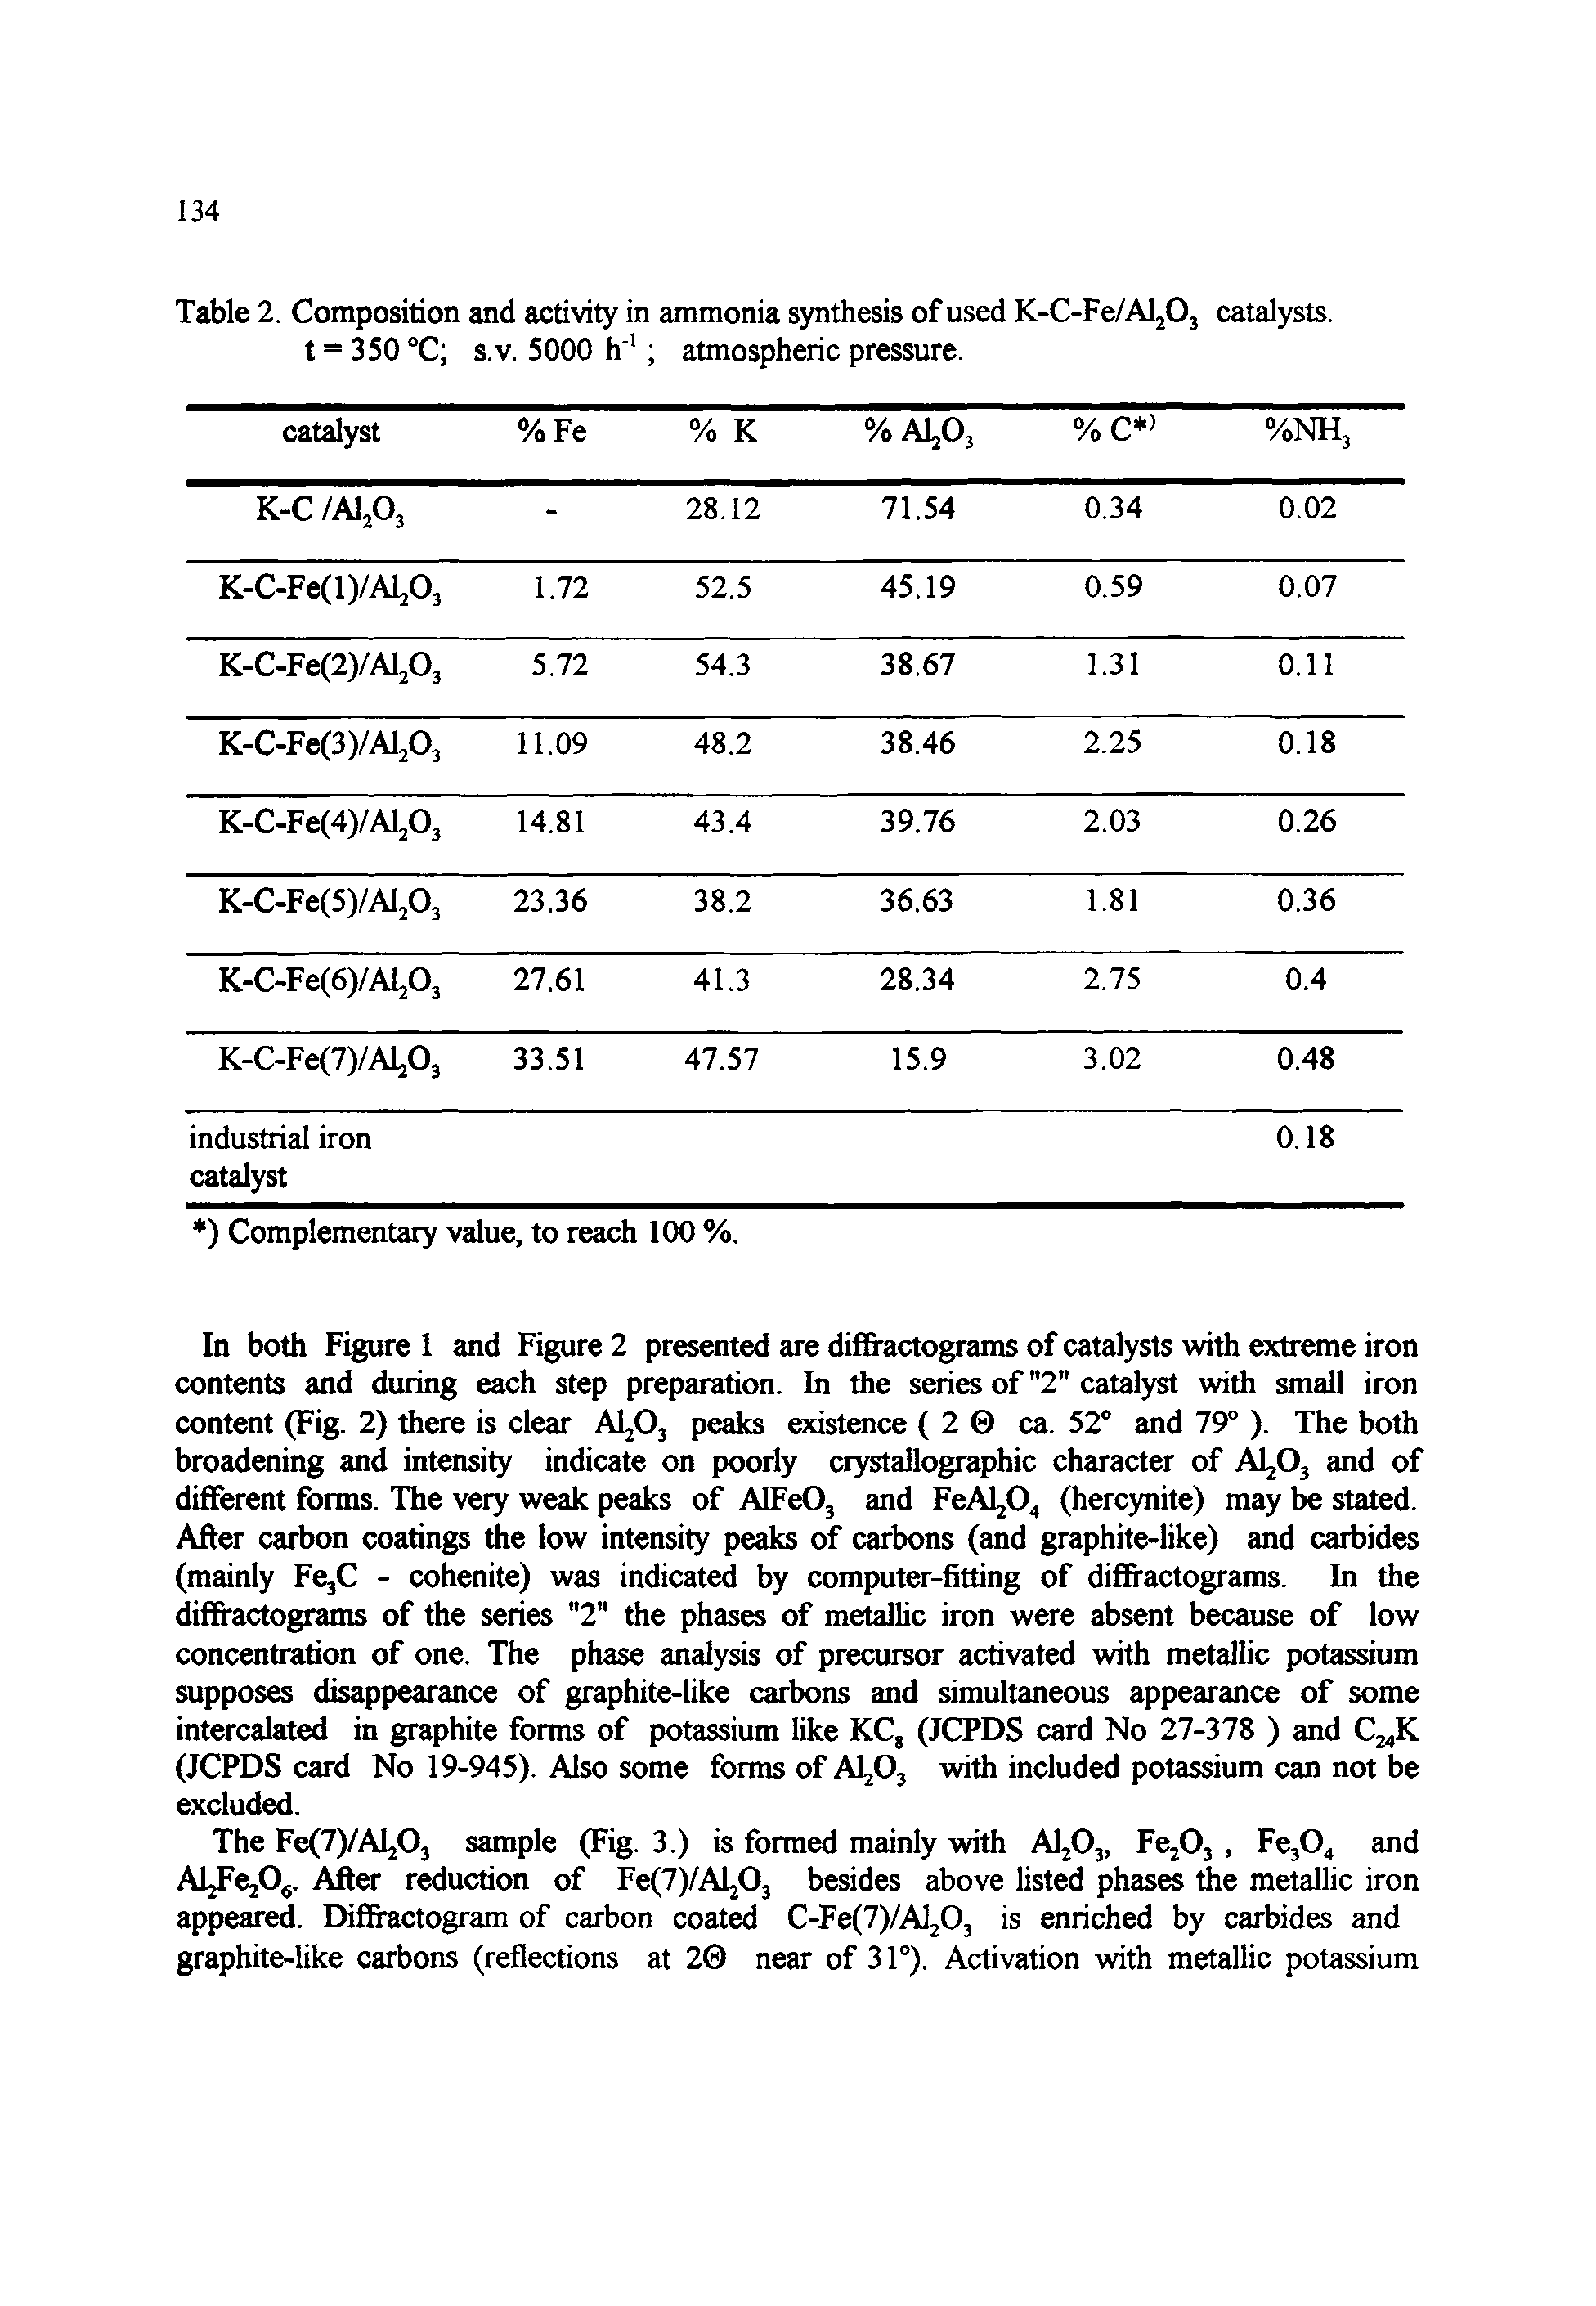 Table 2. Composition and activity in ammonia synthesis of used K-C-Fe/AljOj catalysts, t = 350 C S.V. 5000 h atmospheric pressure.